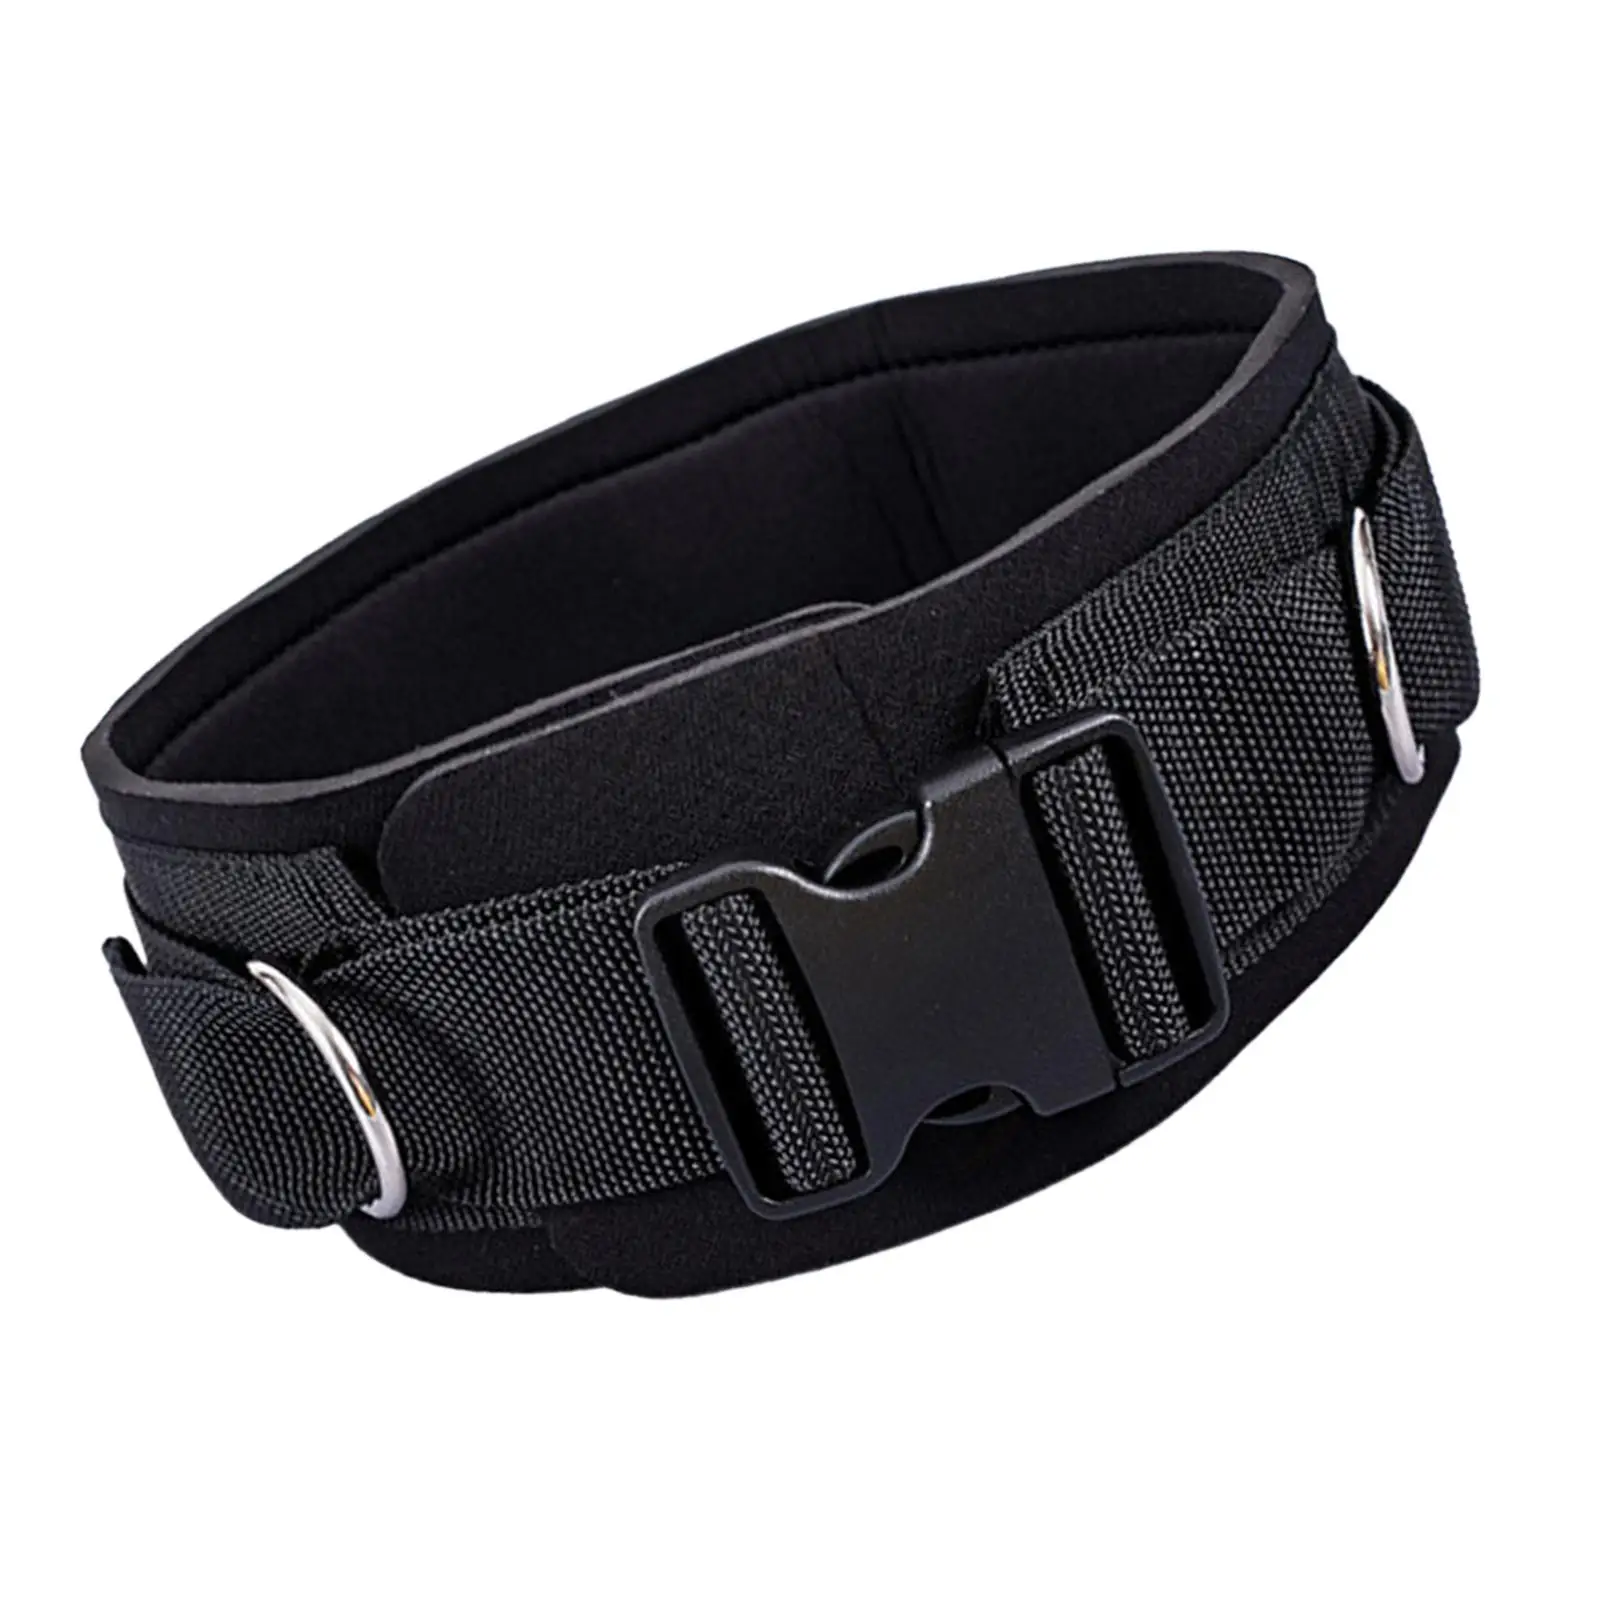 Strength Weightlifting Belt for Men and Women, Weight Lifting Support for Lifting, Fitness, Cross Training and Powerlifitng